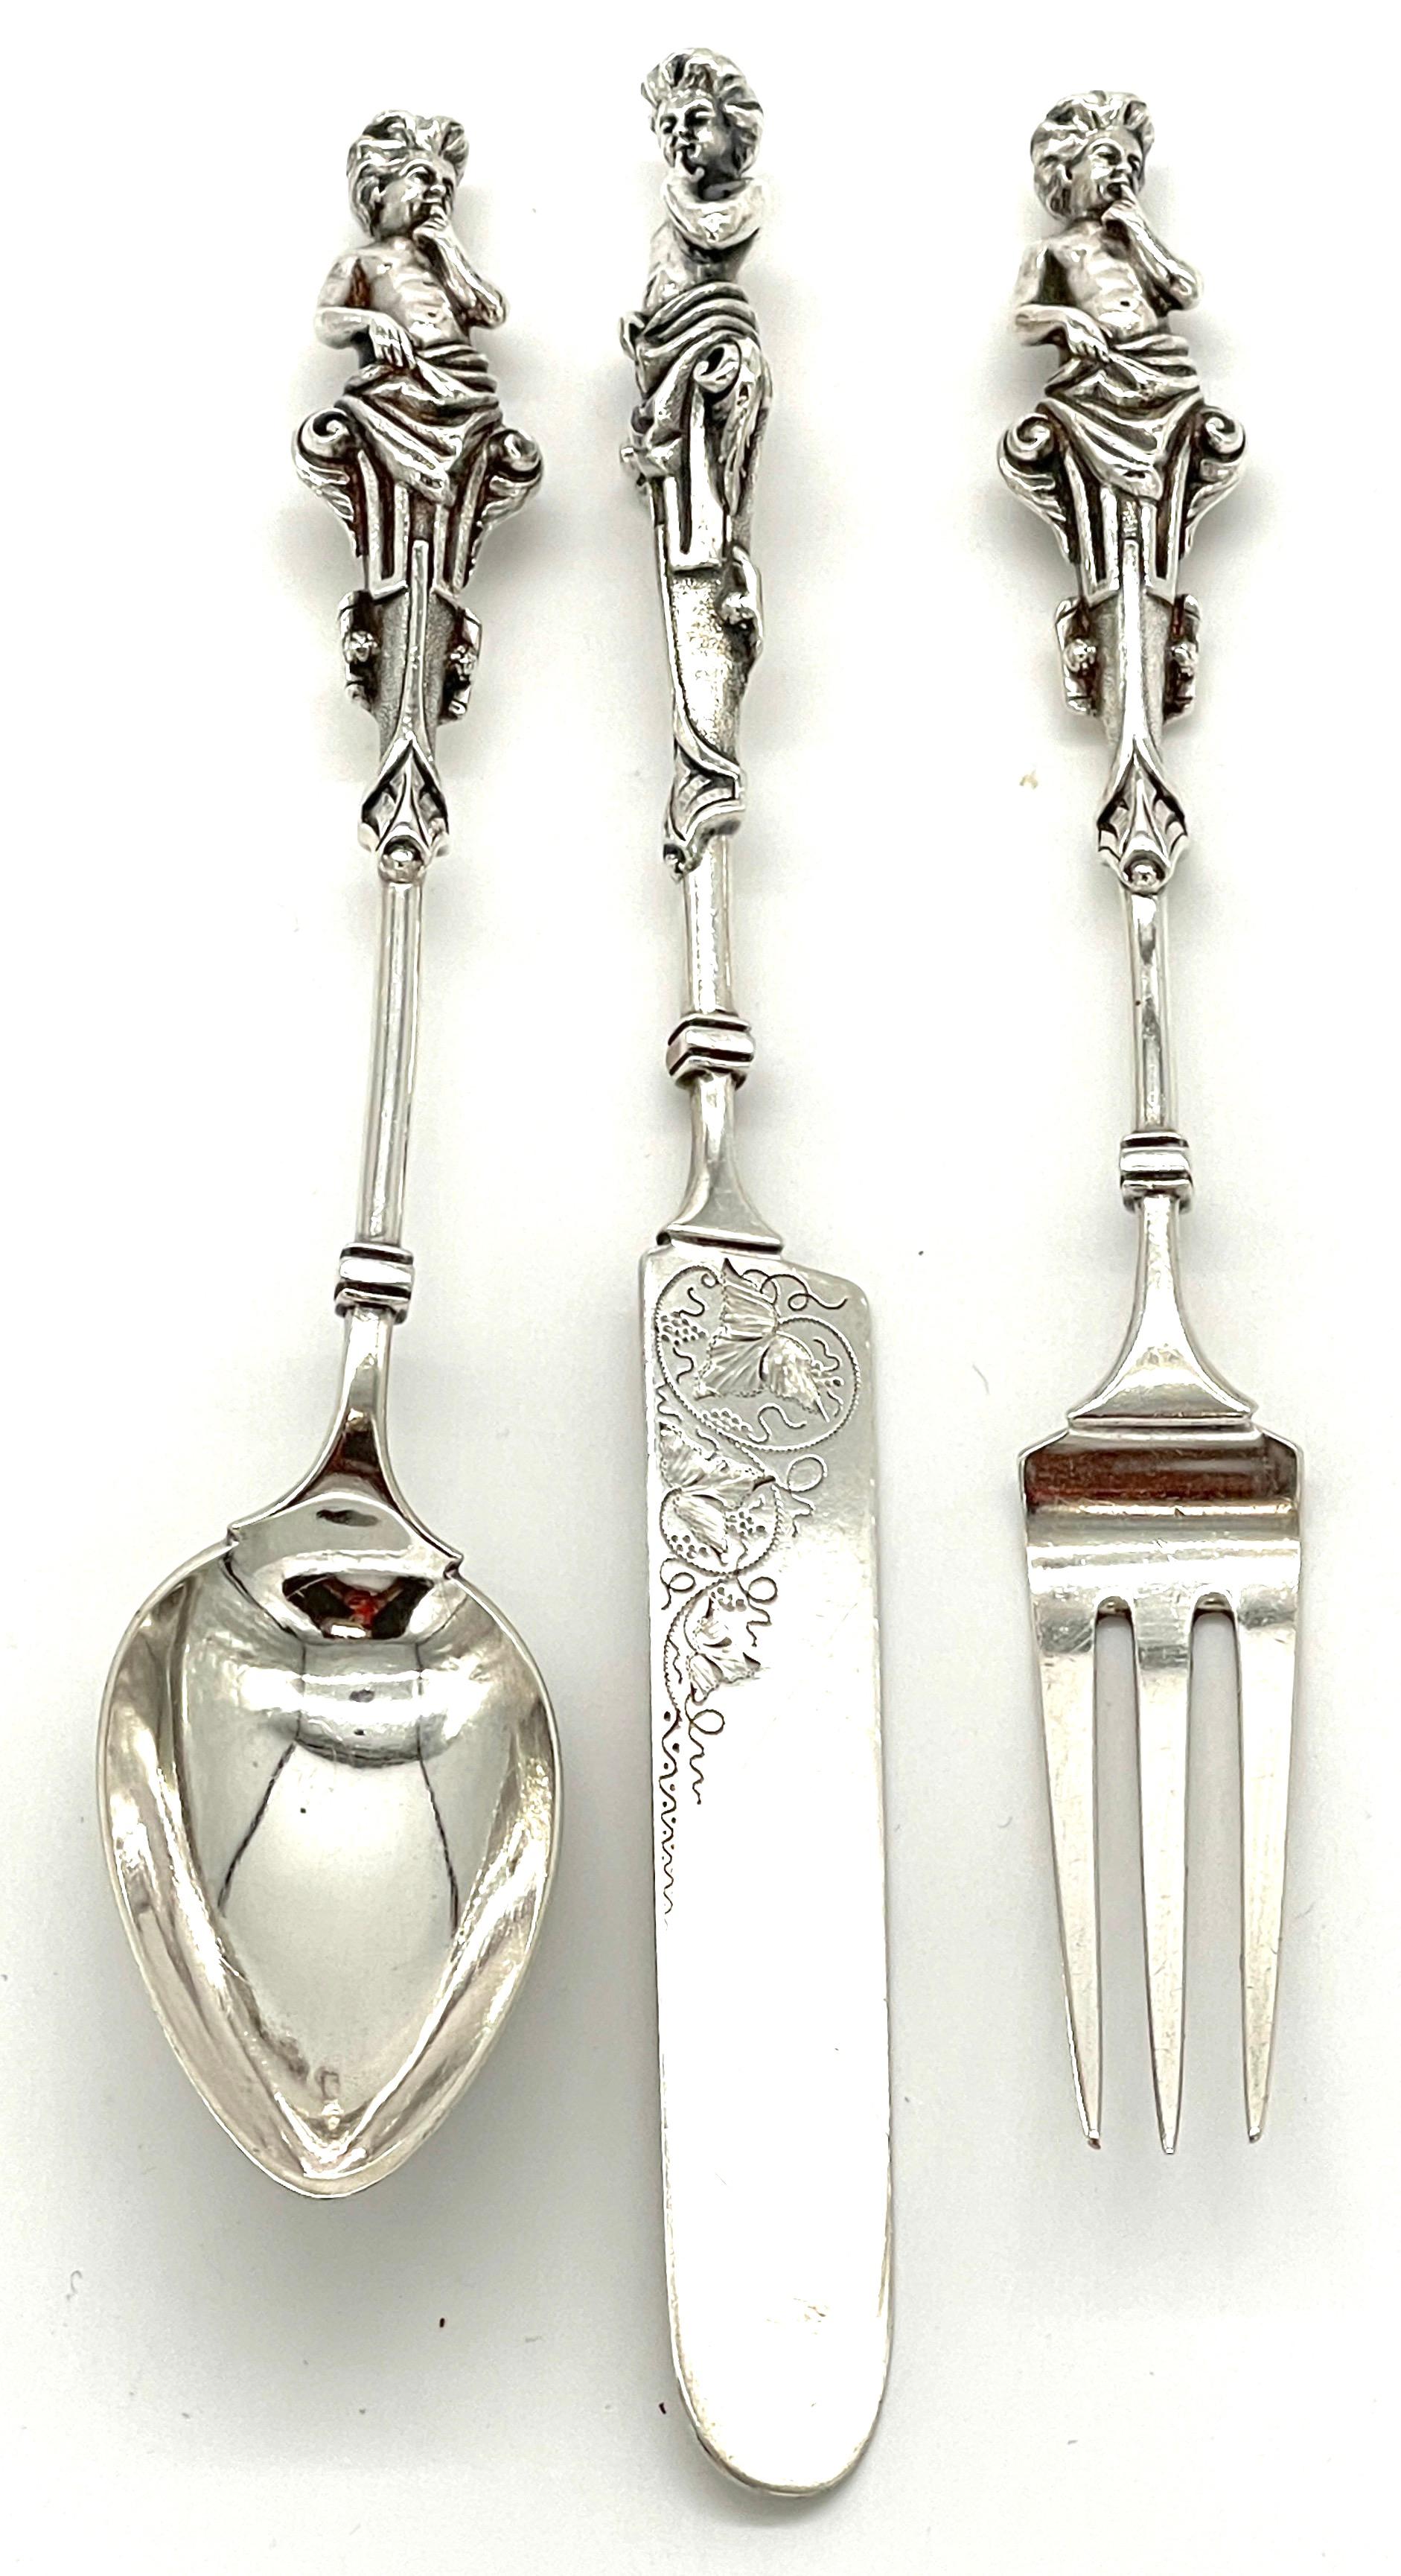 Extraordinary Wood & Hughes Figural Sterling Three-Piece Baby/ Youth Set 
Wood and Hughs, NY NY (1871-1899)

A fine Wood & Hughes figural sterling three-piece baby/ youth set,  made by the renowned Wood and Hughes silversmiths of New York City, from